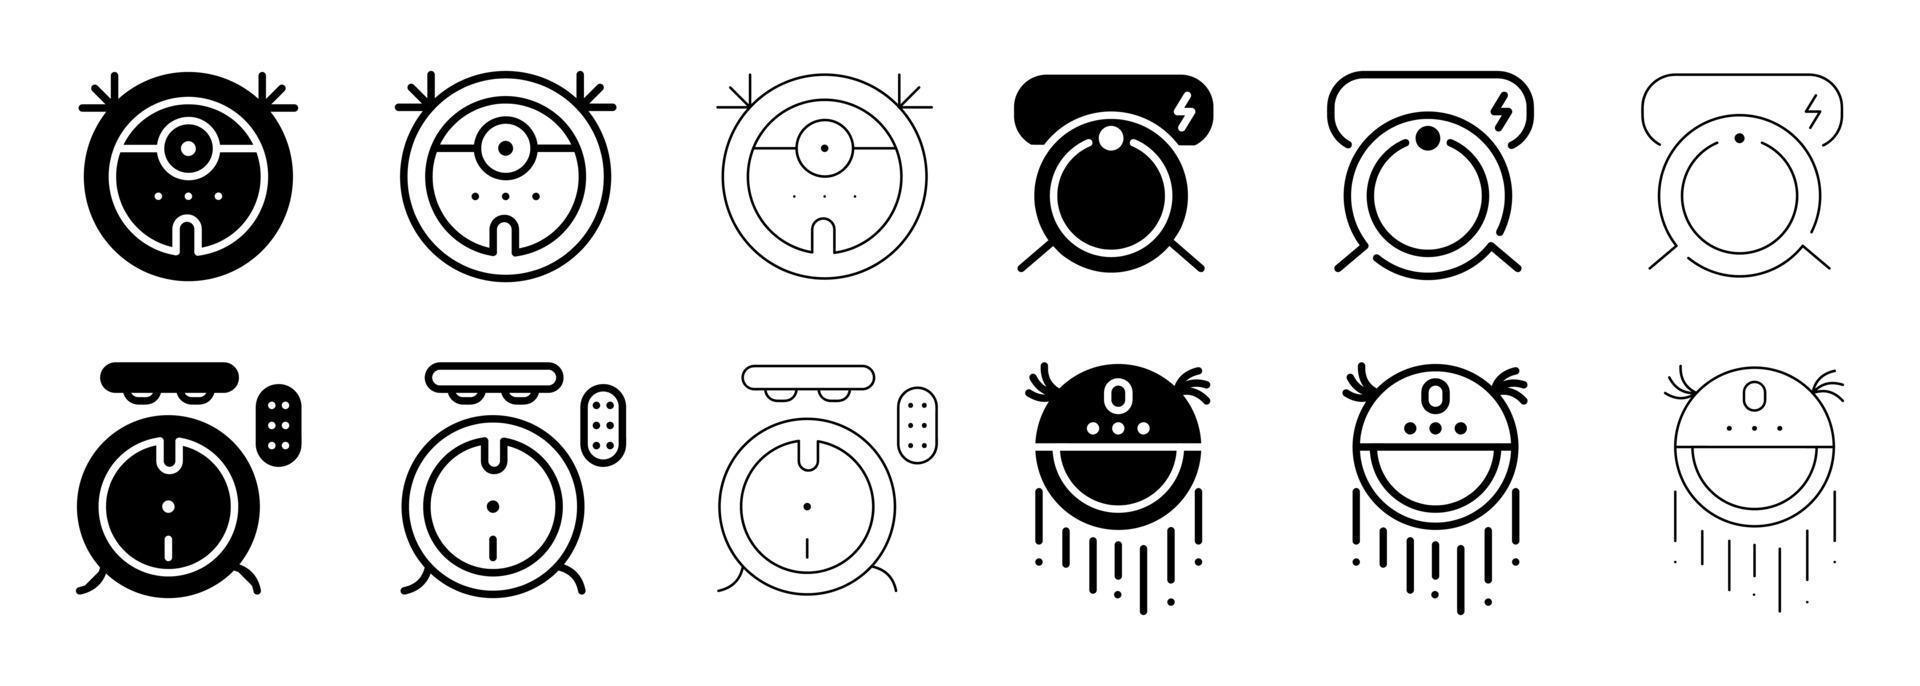 Robot vacuum cleaner isolated icon sets. Simple element illustration from smart home concept icons. Robot vacuum cleaner editable web and logo sign symbol design on white background. vector